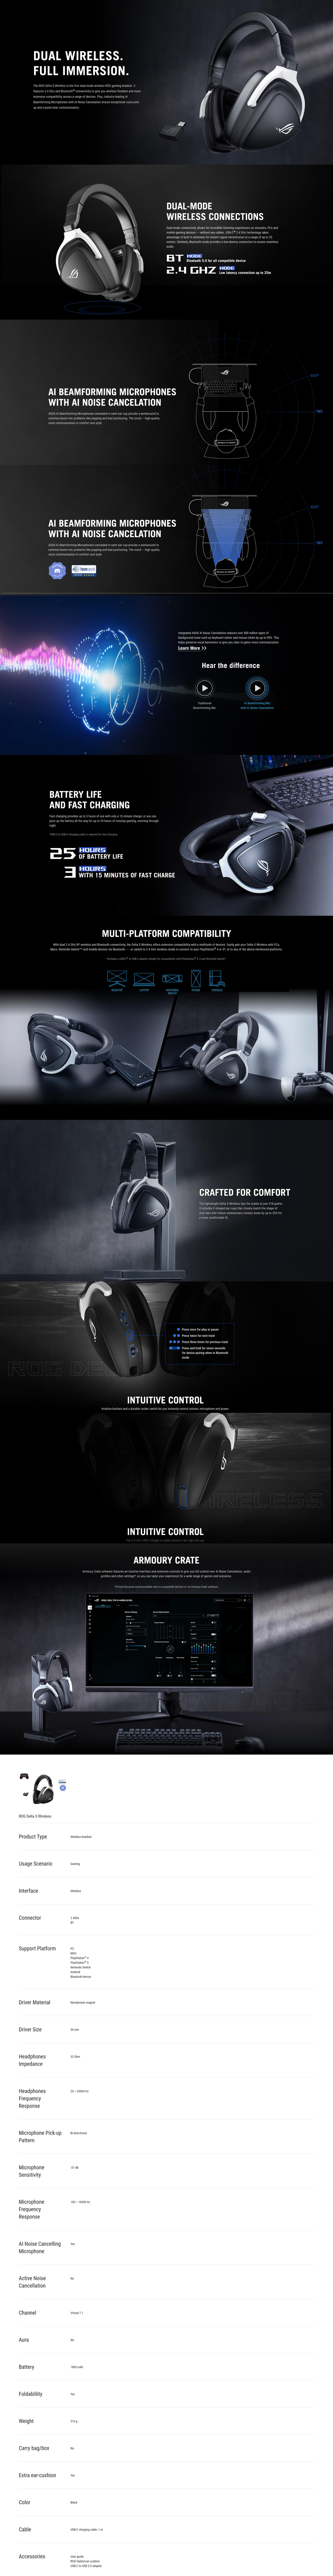 A large marketing image providing additional information about the product ASUS ROG DELTA S 2.4G Wireless Gaming Headset - Additional alt info not provided